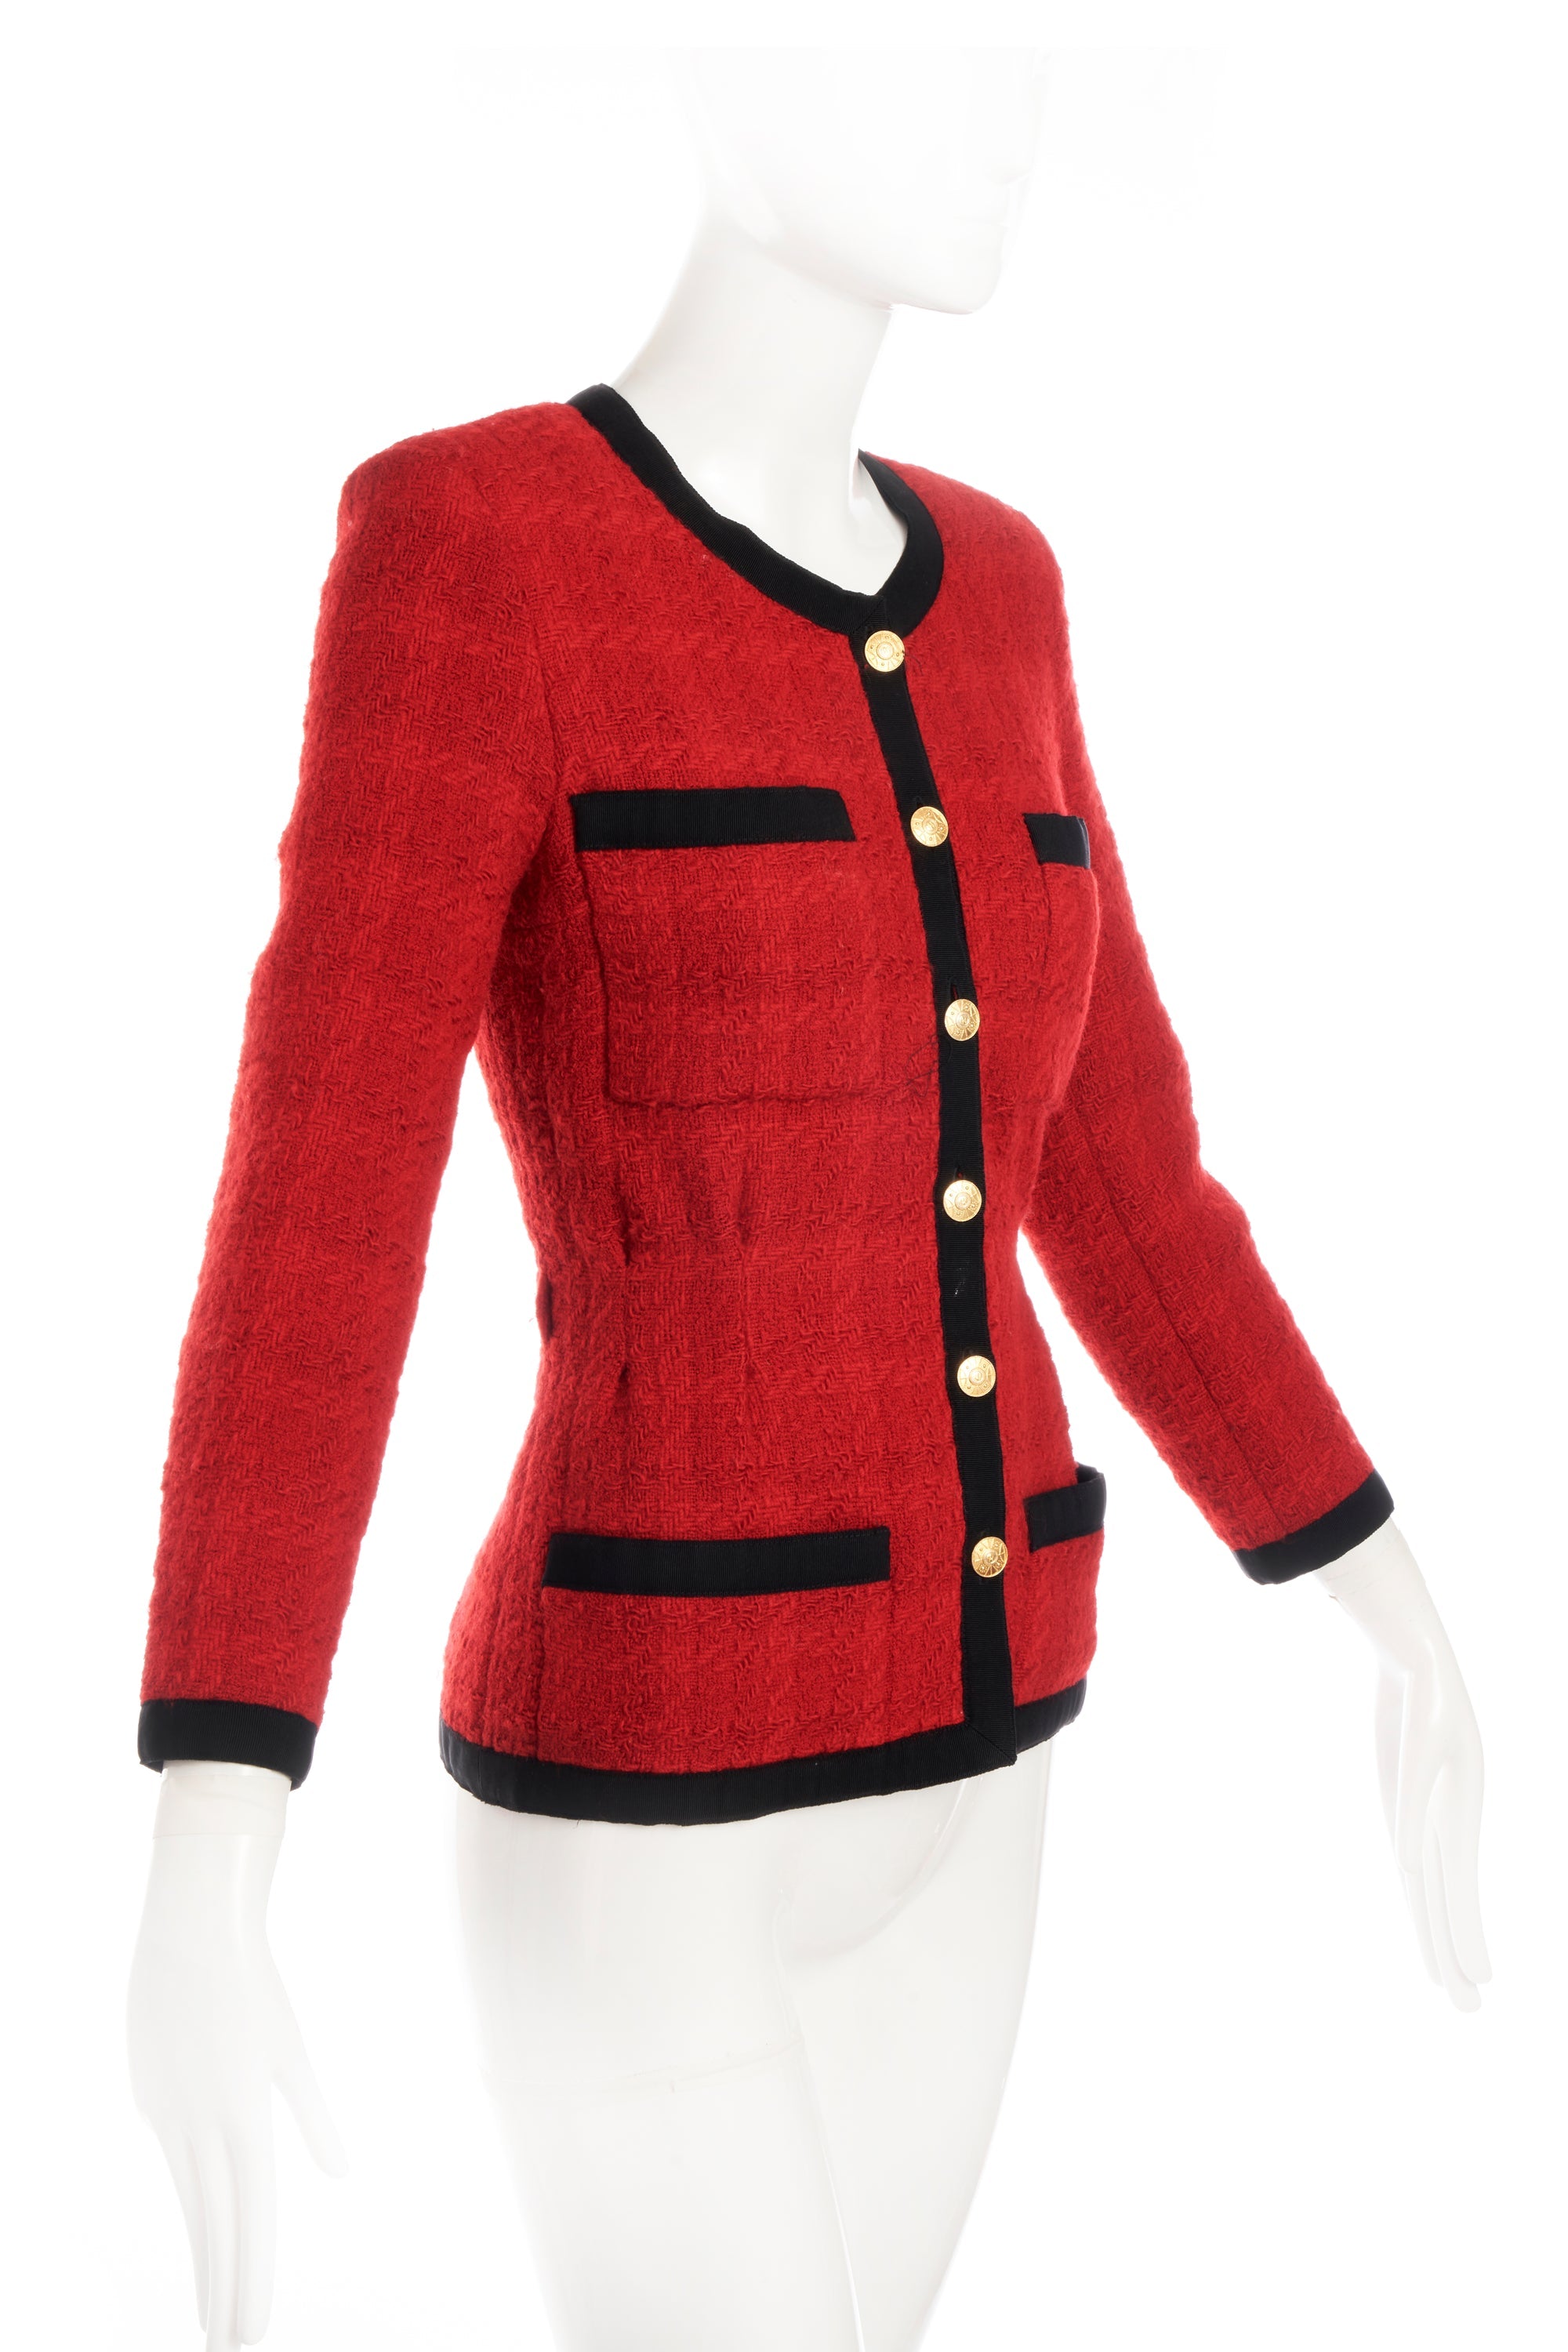 Chanel Red Boucle Jacket Black Faile Trim 24k Gold plated buttons - Foxy Couture Carmel